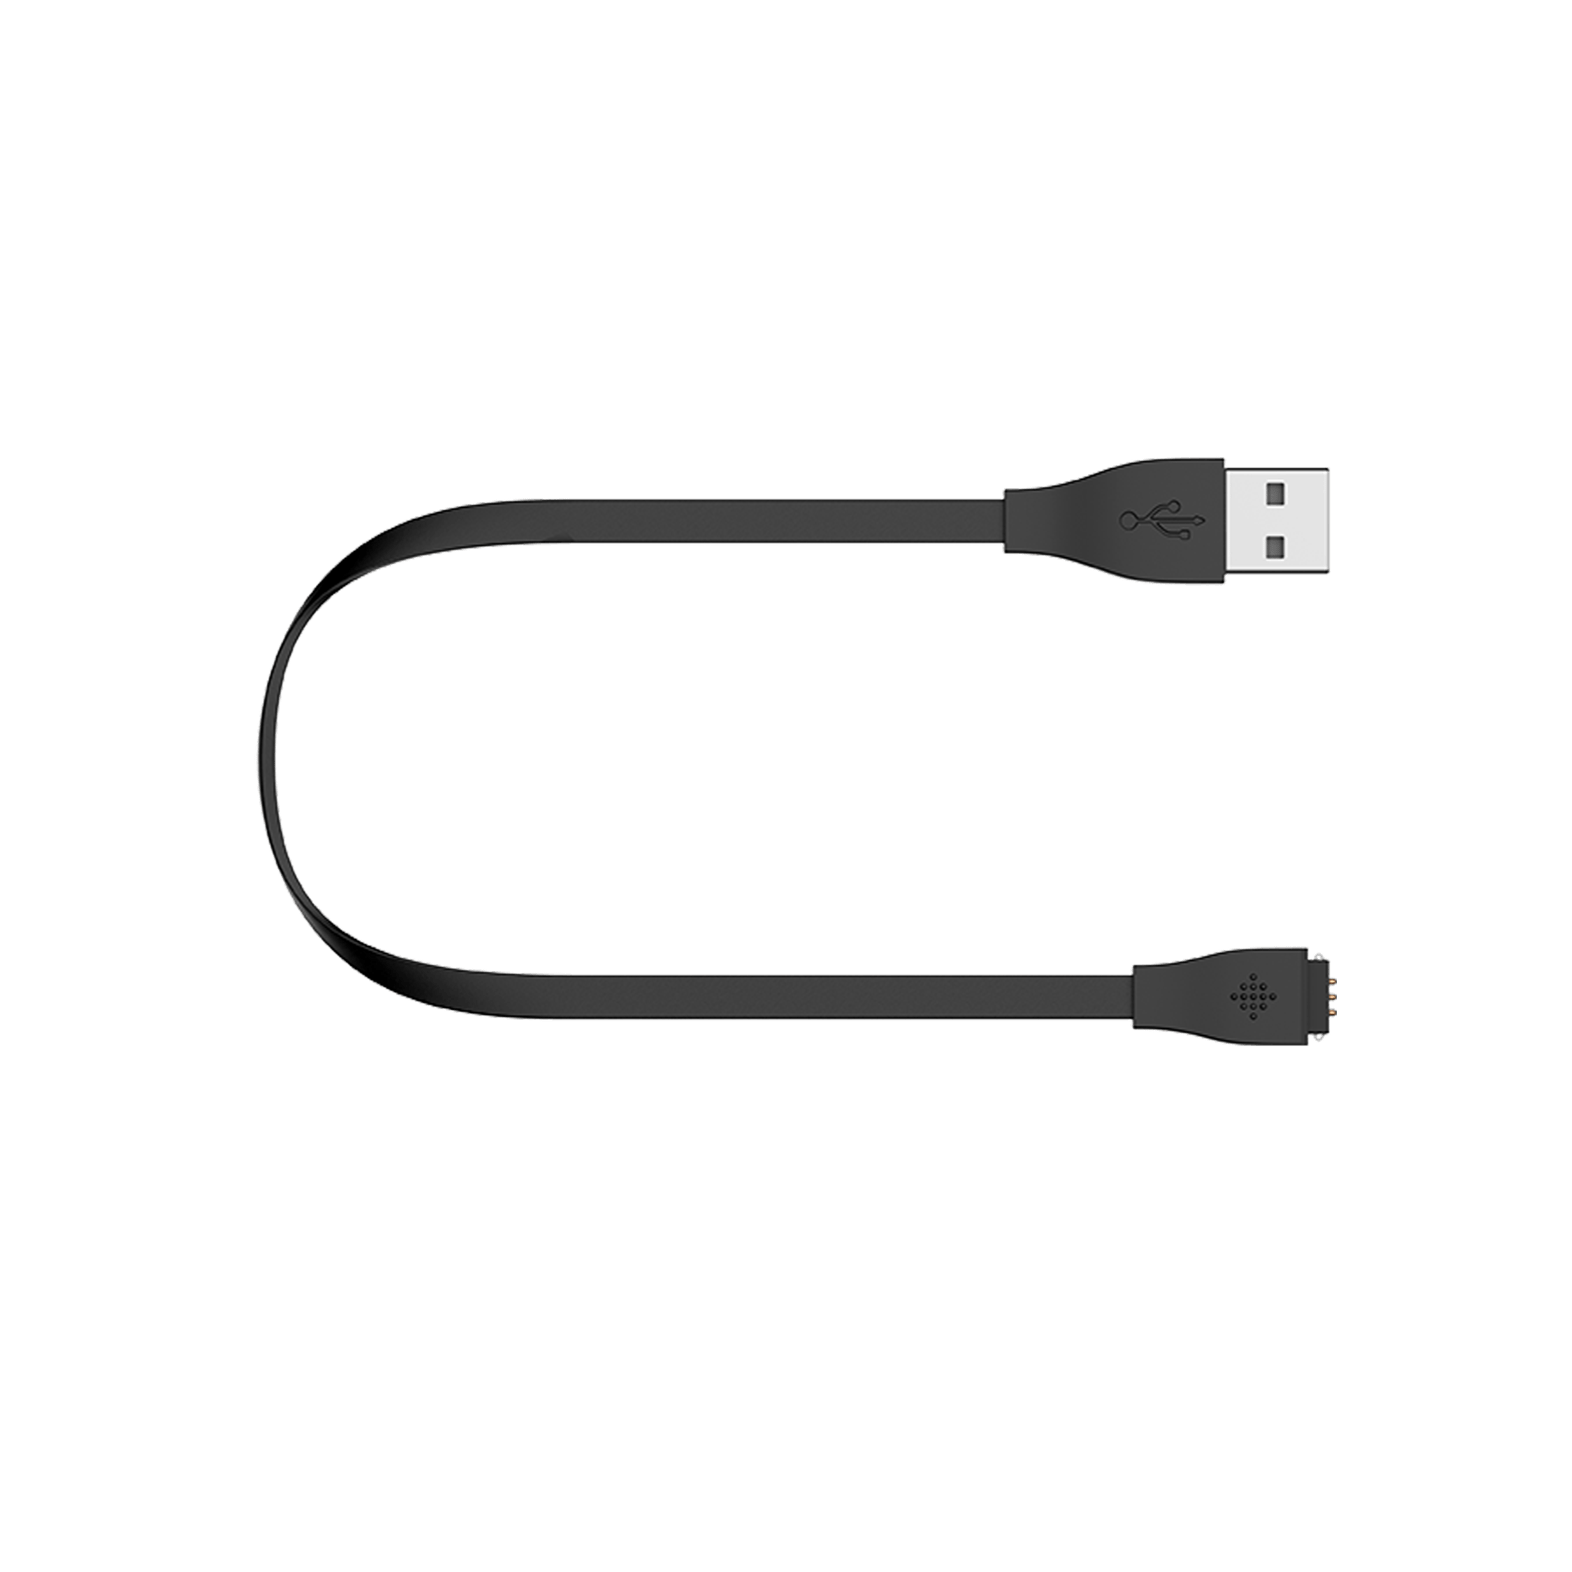 fitbit charging cable stores